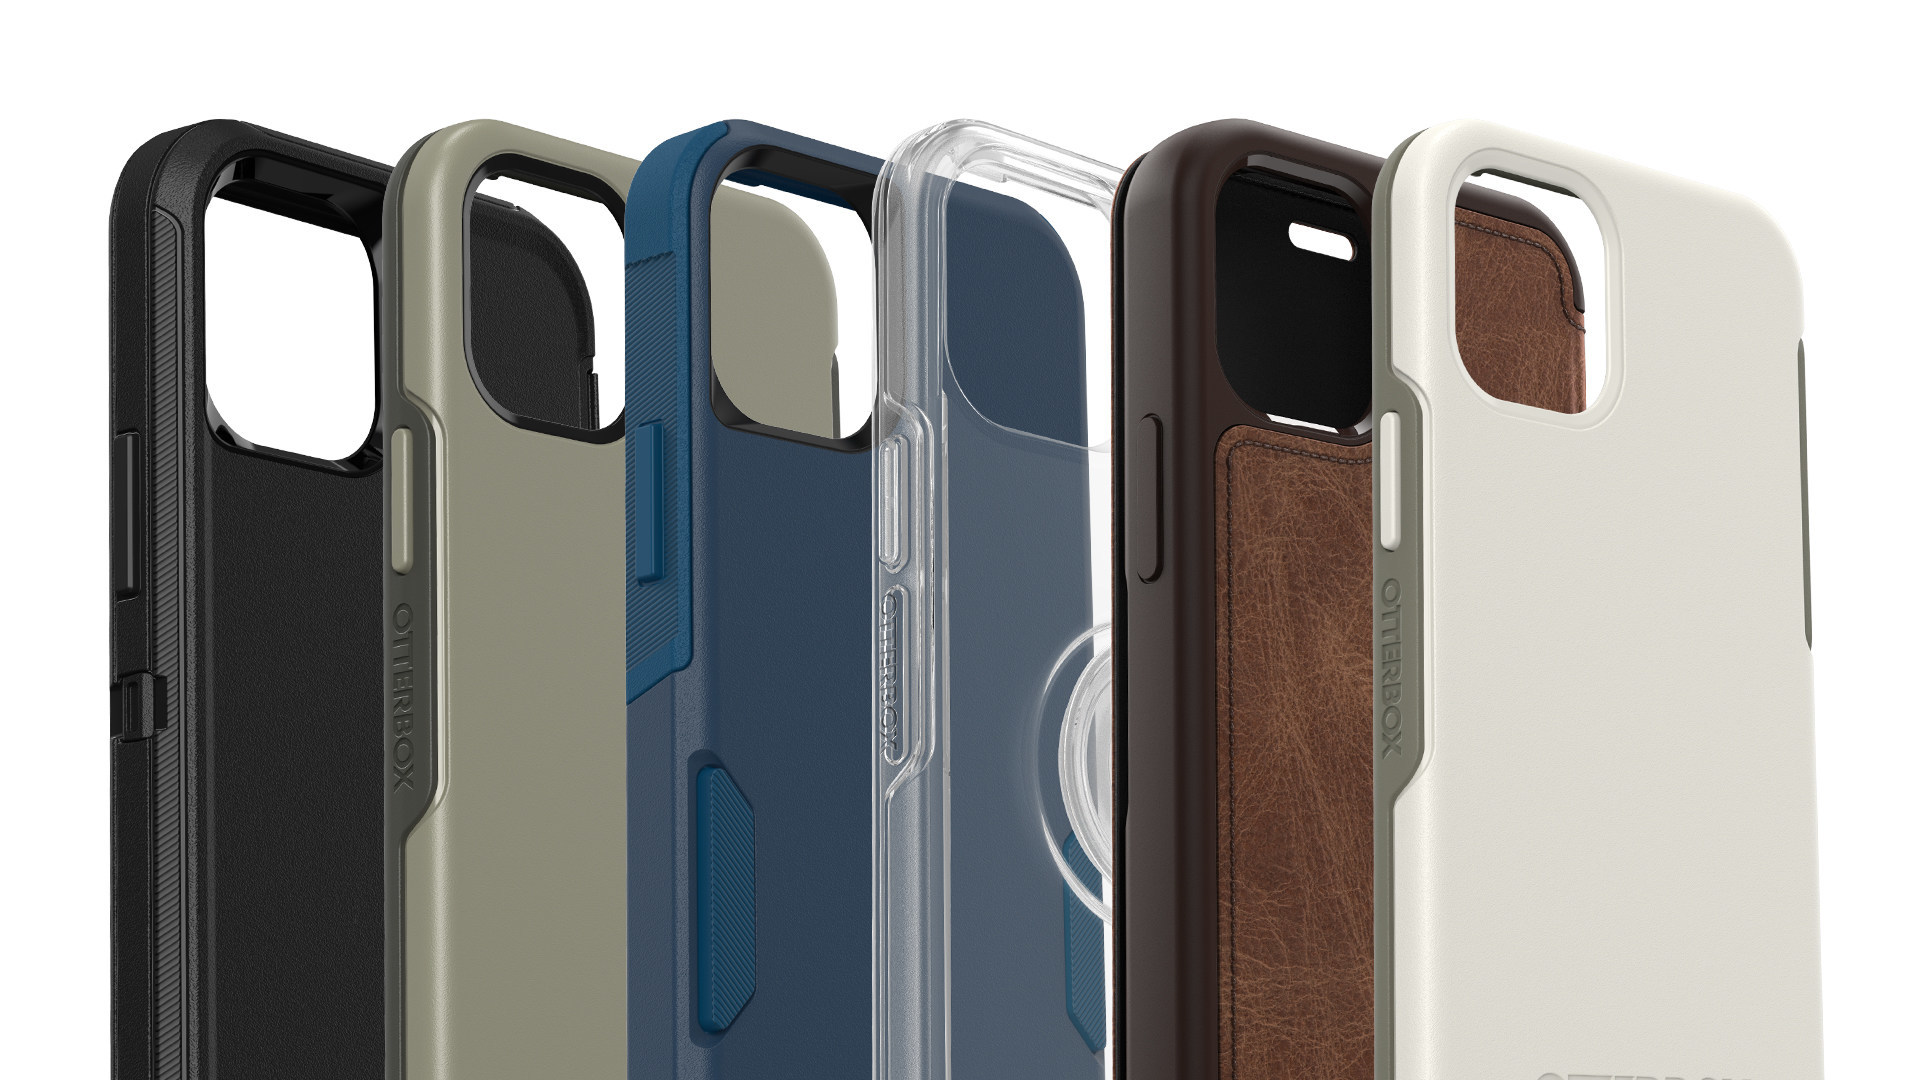 Get Your OtterBox Case for the New Apple iPhone 12 Models and A Chance